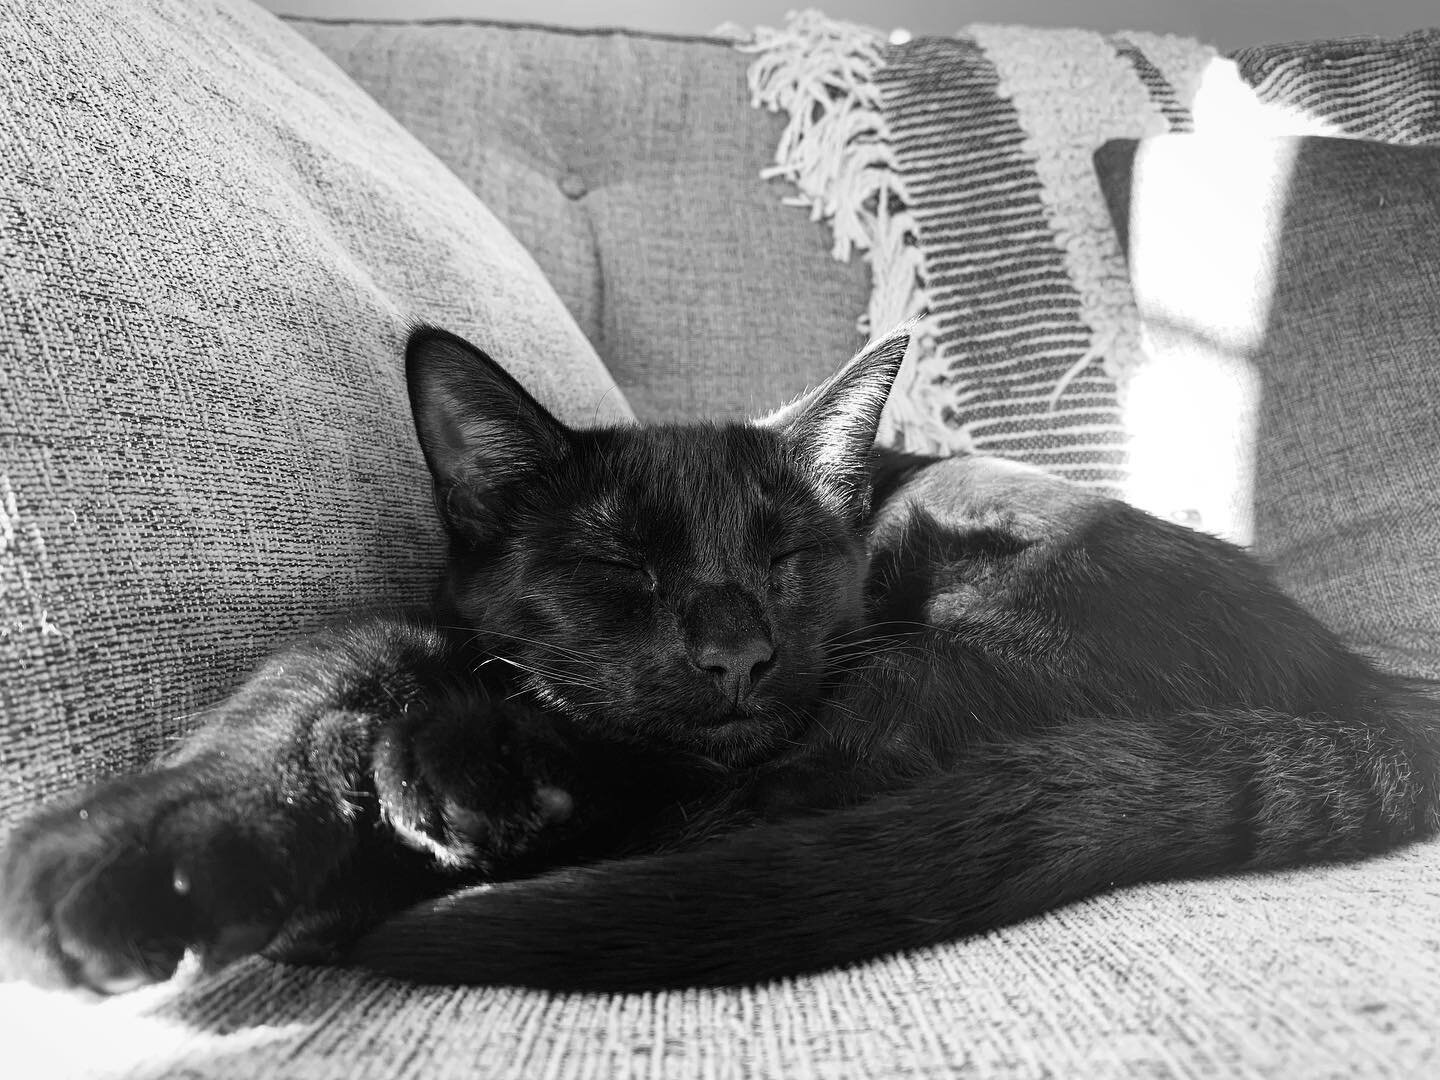 Lady naps a lot 🐾
.
.
.
.
.
#cat #catsofinstagram #blackandwhite #blackcat #blackcats #blackcatsofinstagram #catnap #toebeans #kittensofinstagram #kitten #kittens #kittenlove #catlovers